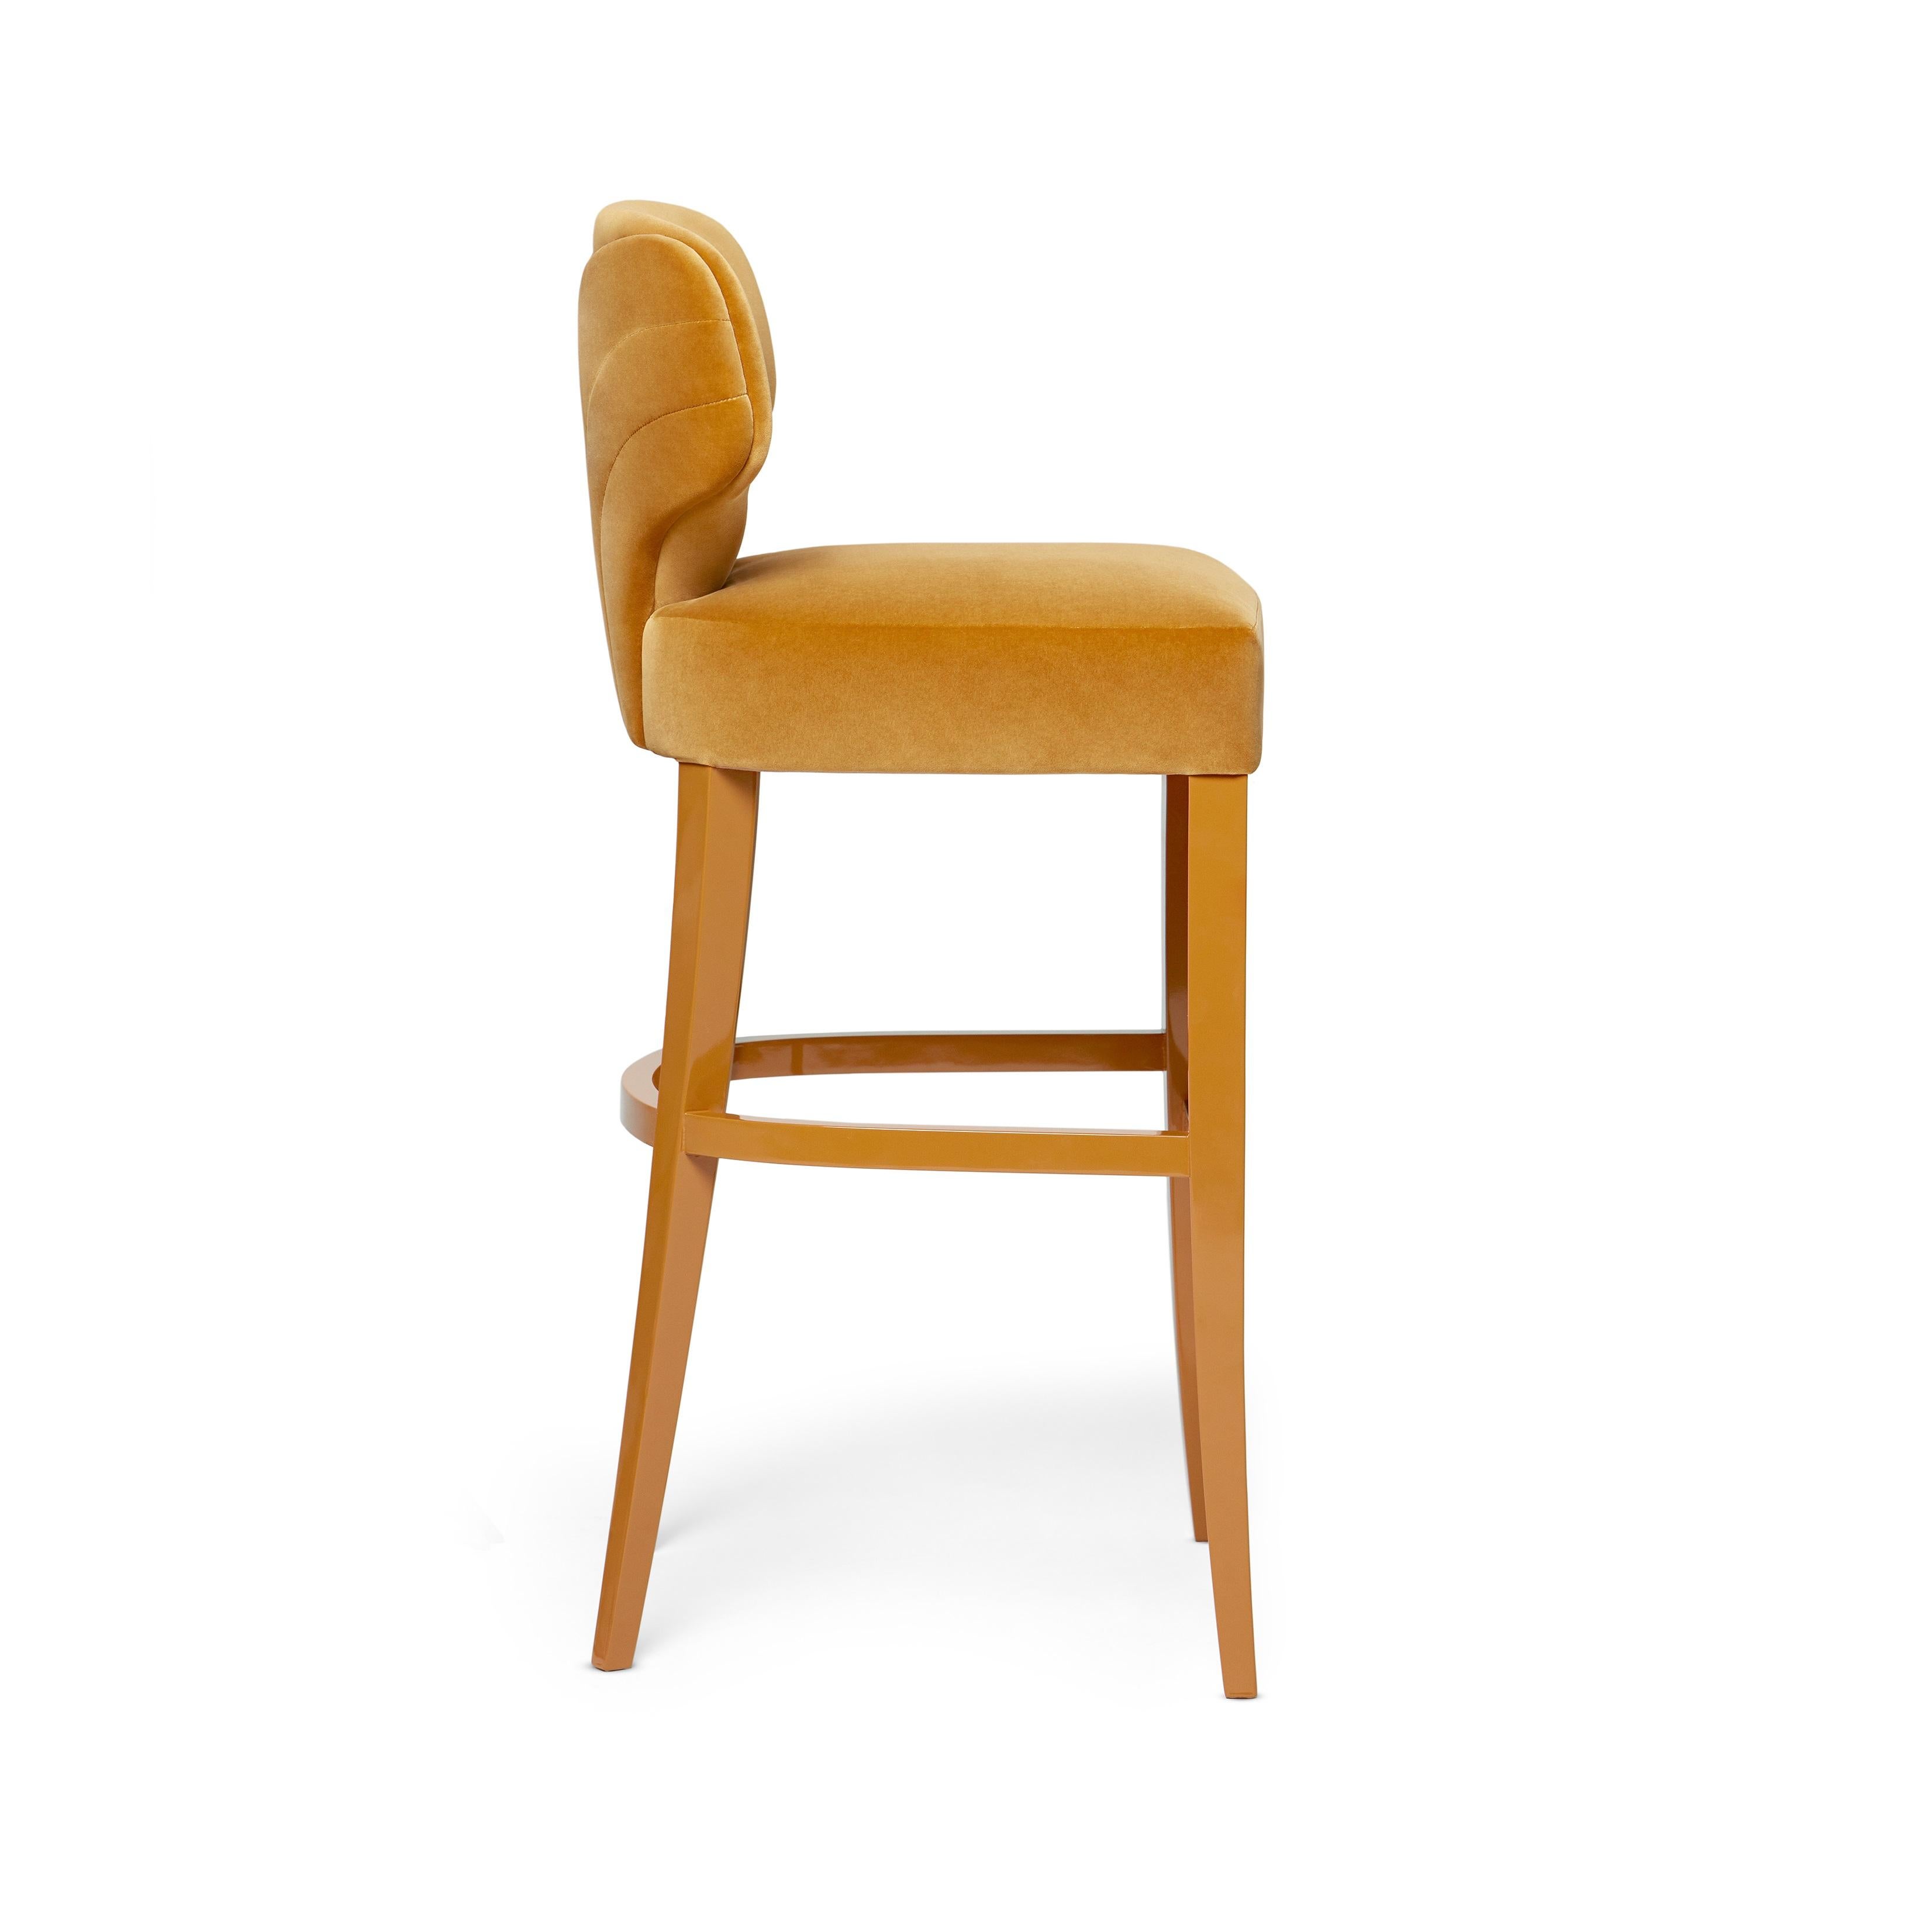 Modern Contemporary Barstool with Seaming Details on the Back For Sale